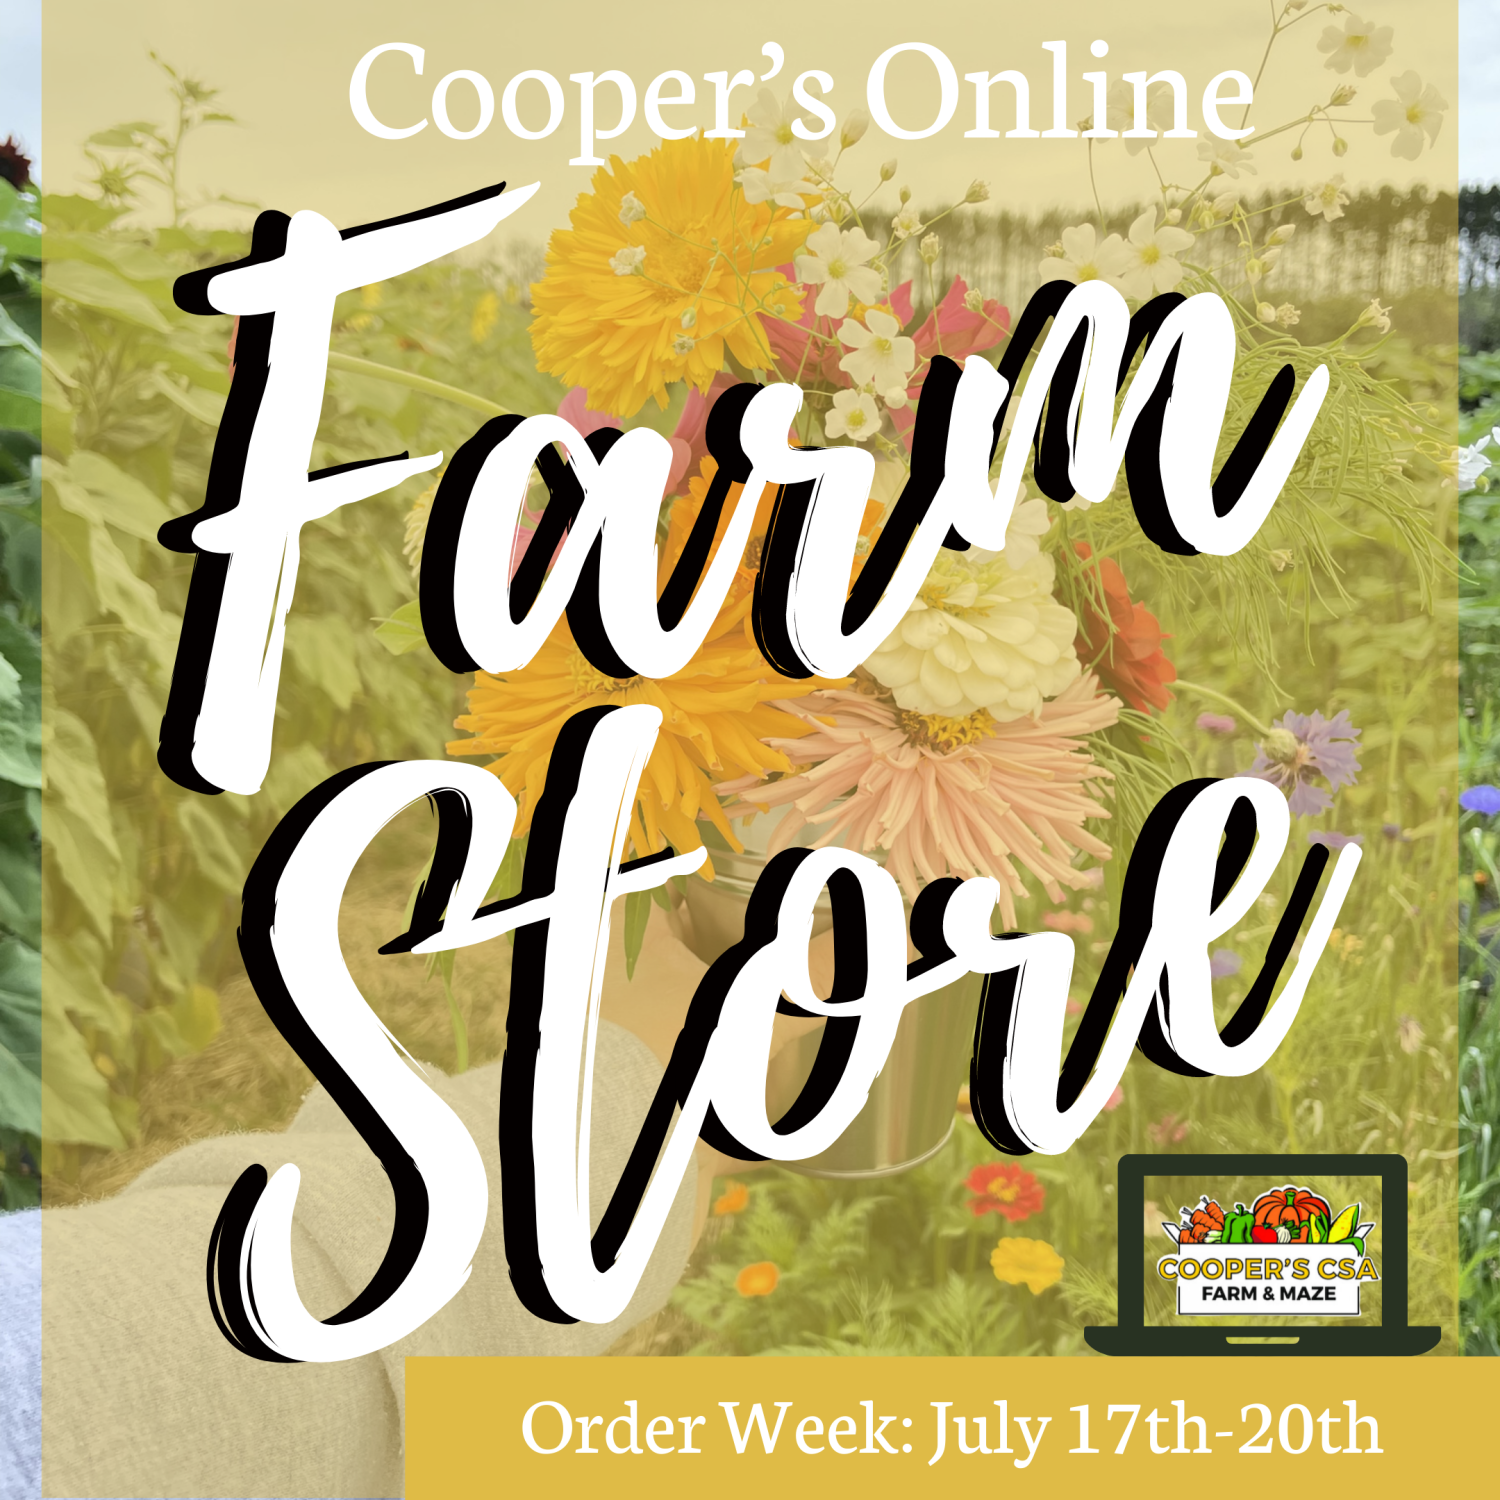 Coopers CSA Online FarmStore- Order week July 17th-20th